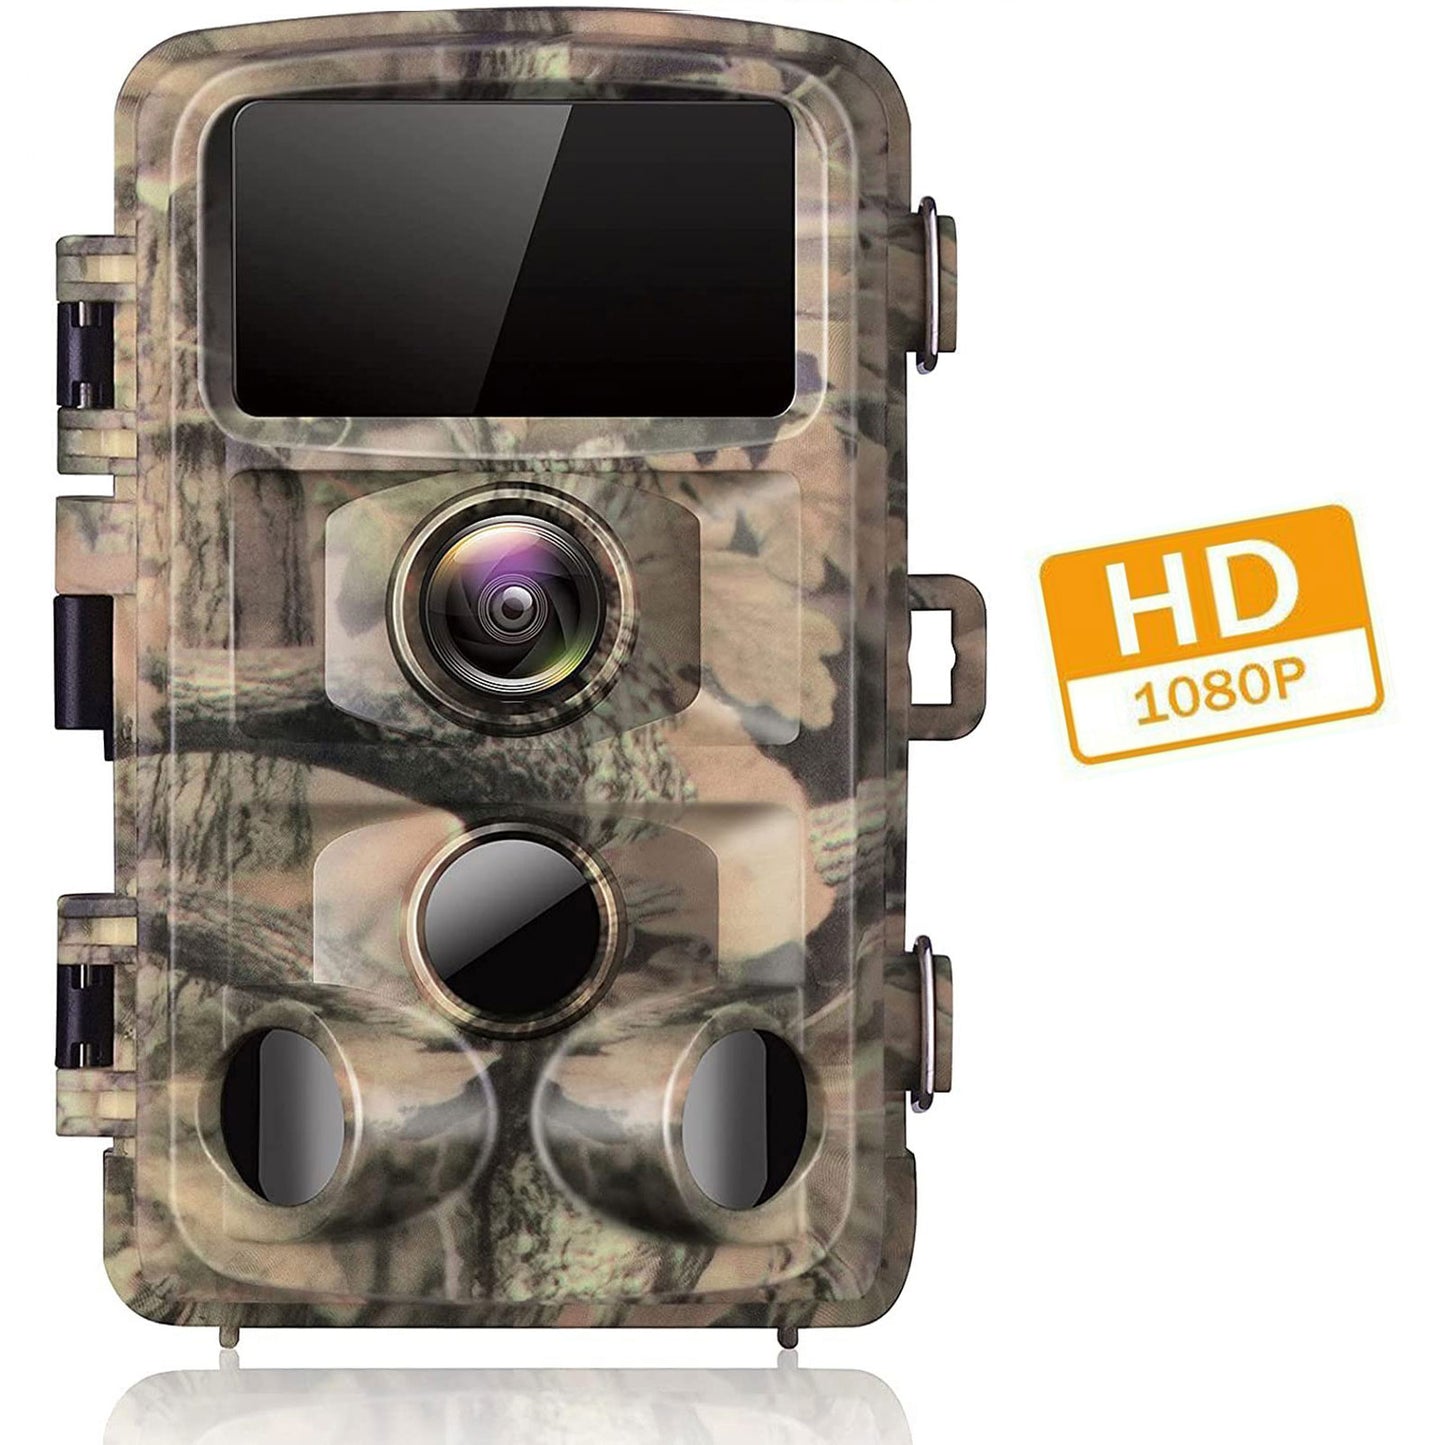 TOGUARD Trail Game Camera 1080P Hunting Deer Camera with Infrared Night Vision Waterproof IP56 Trail Cam for Wildlife Monitoring